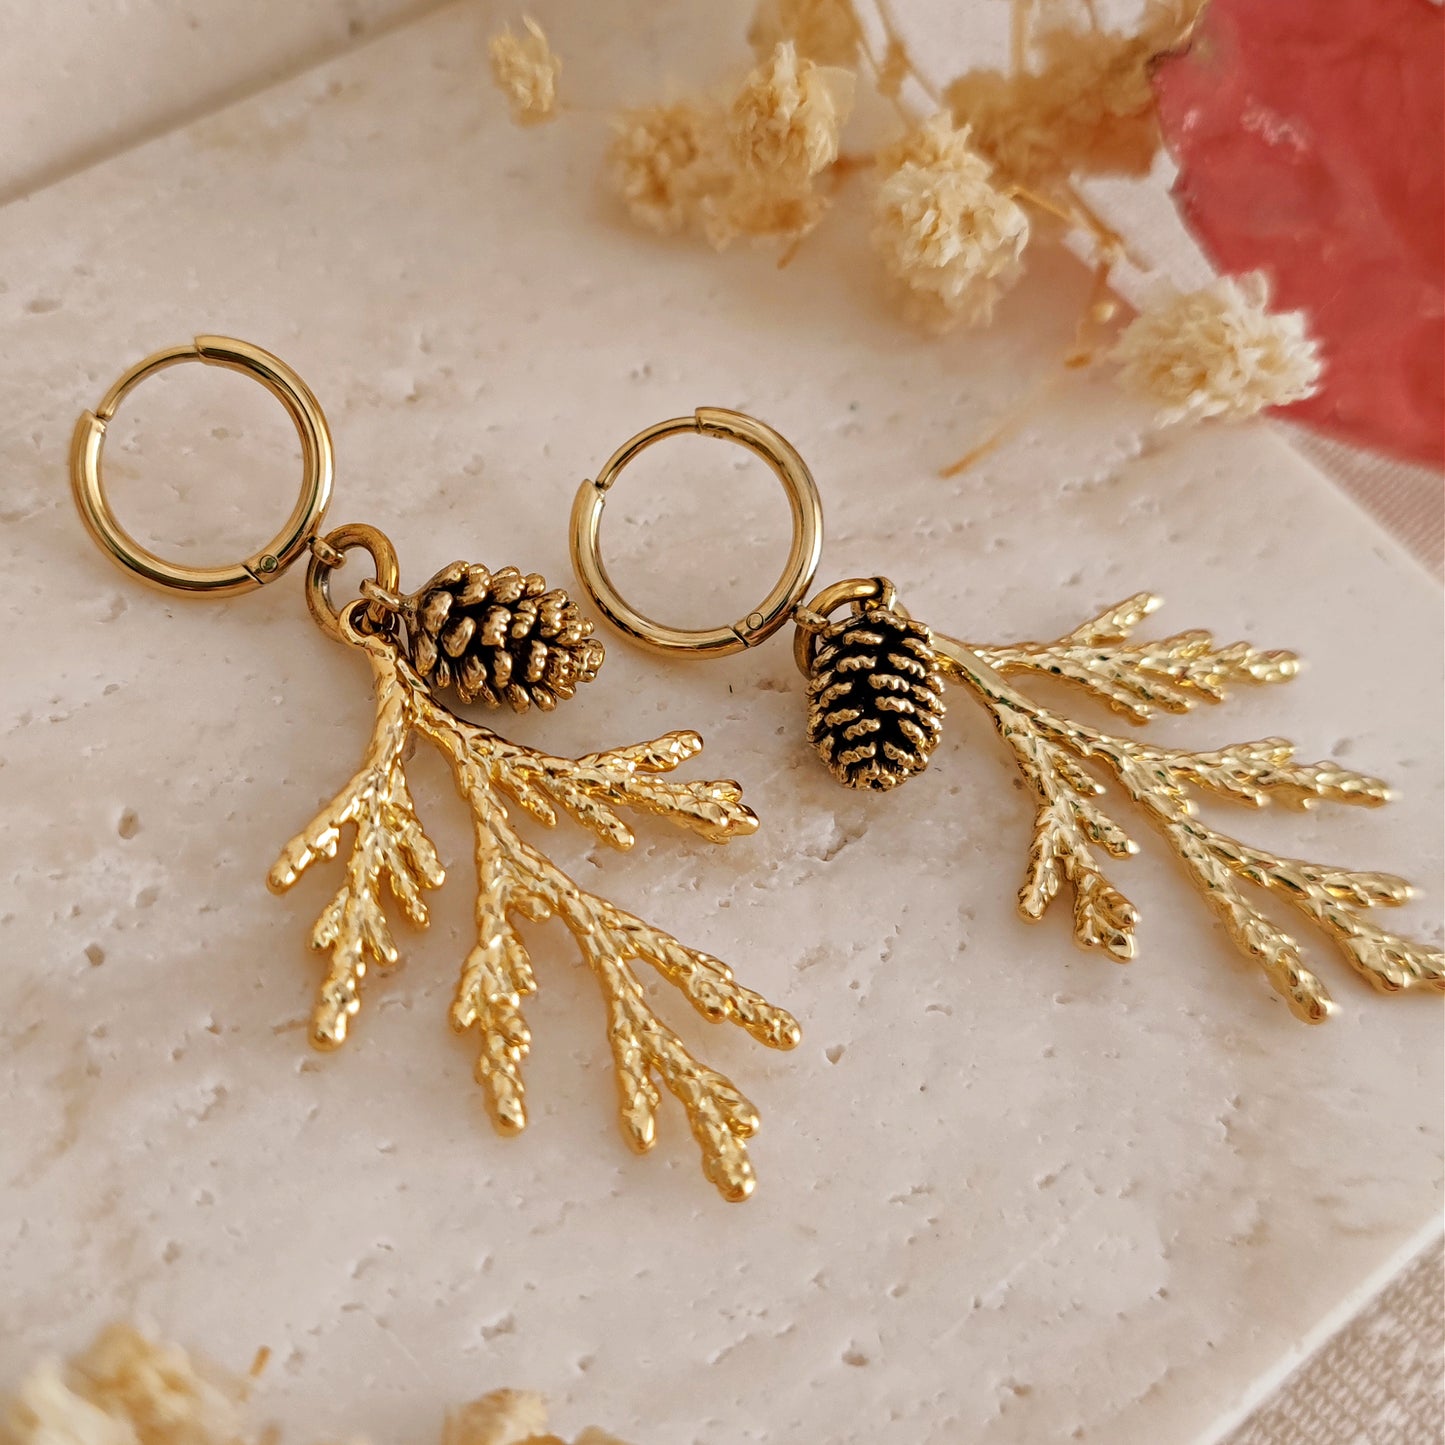 "Pine Forest" earrings with pine tree branches and pine cones